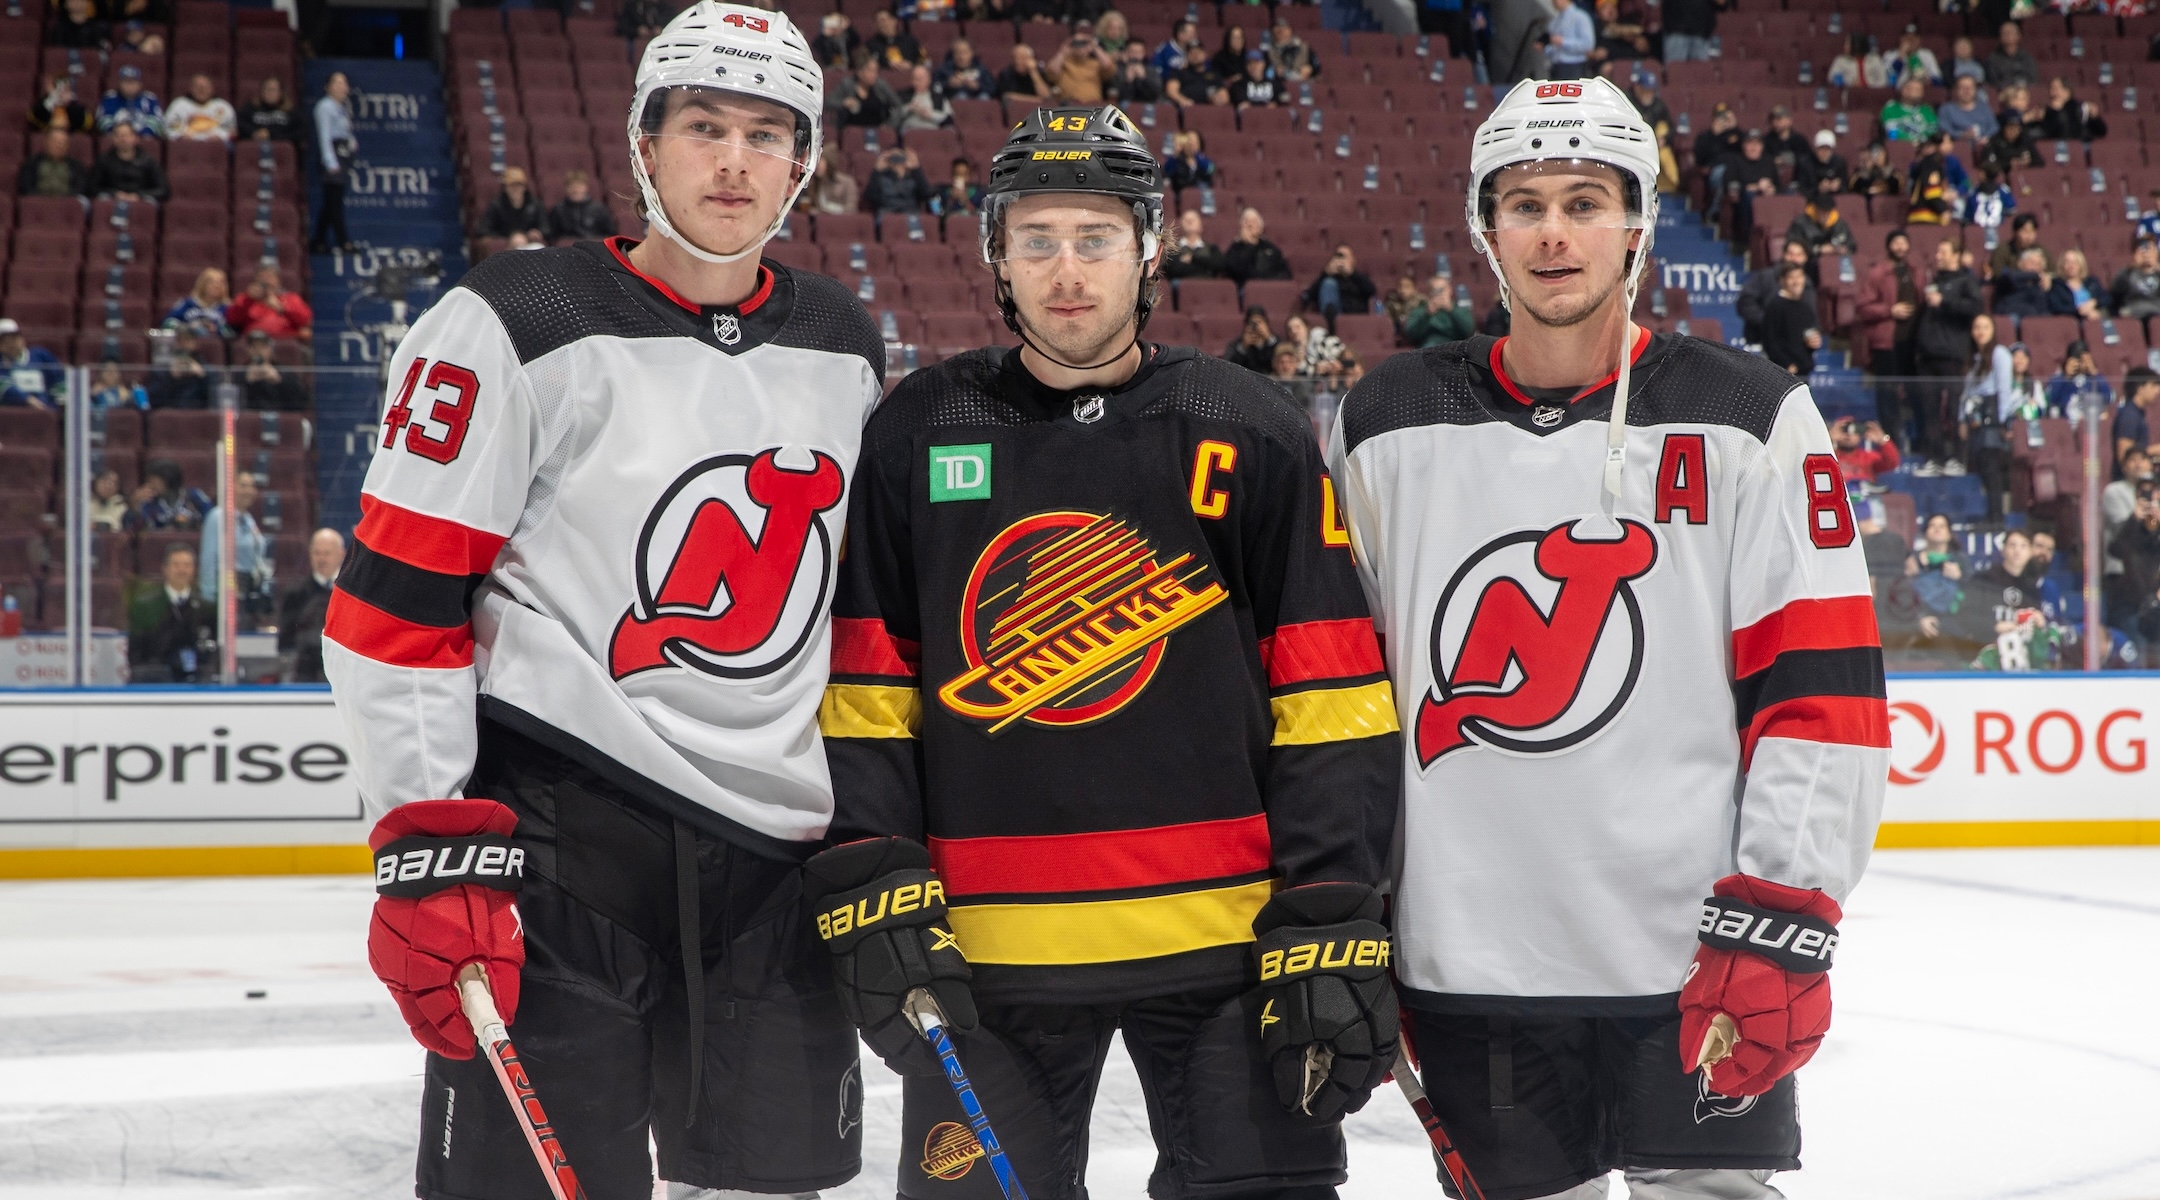 From left to right: Luke, Quinn and Jack Hughes pose for a photo before their NHL game at Rogers Arena in Vancouver, Dec. 5, 2023. (Jeff Vinnick/NHLI via Getty Images)